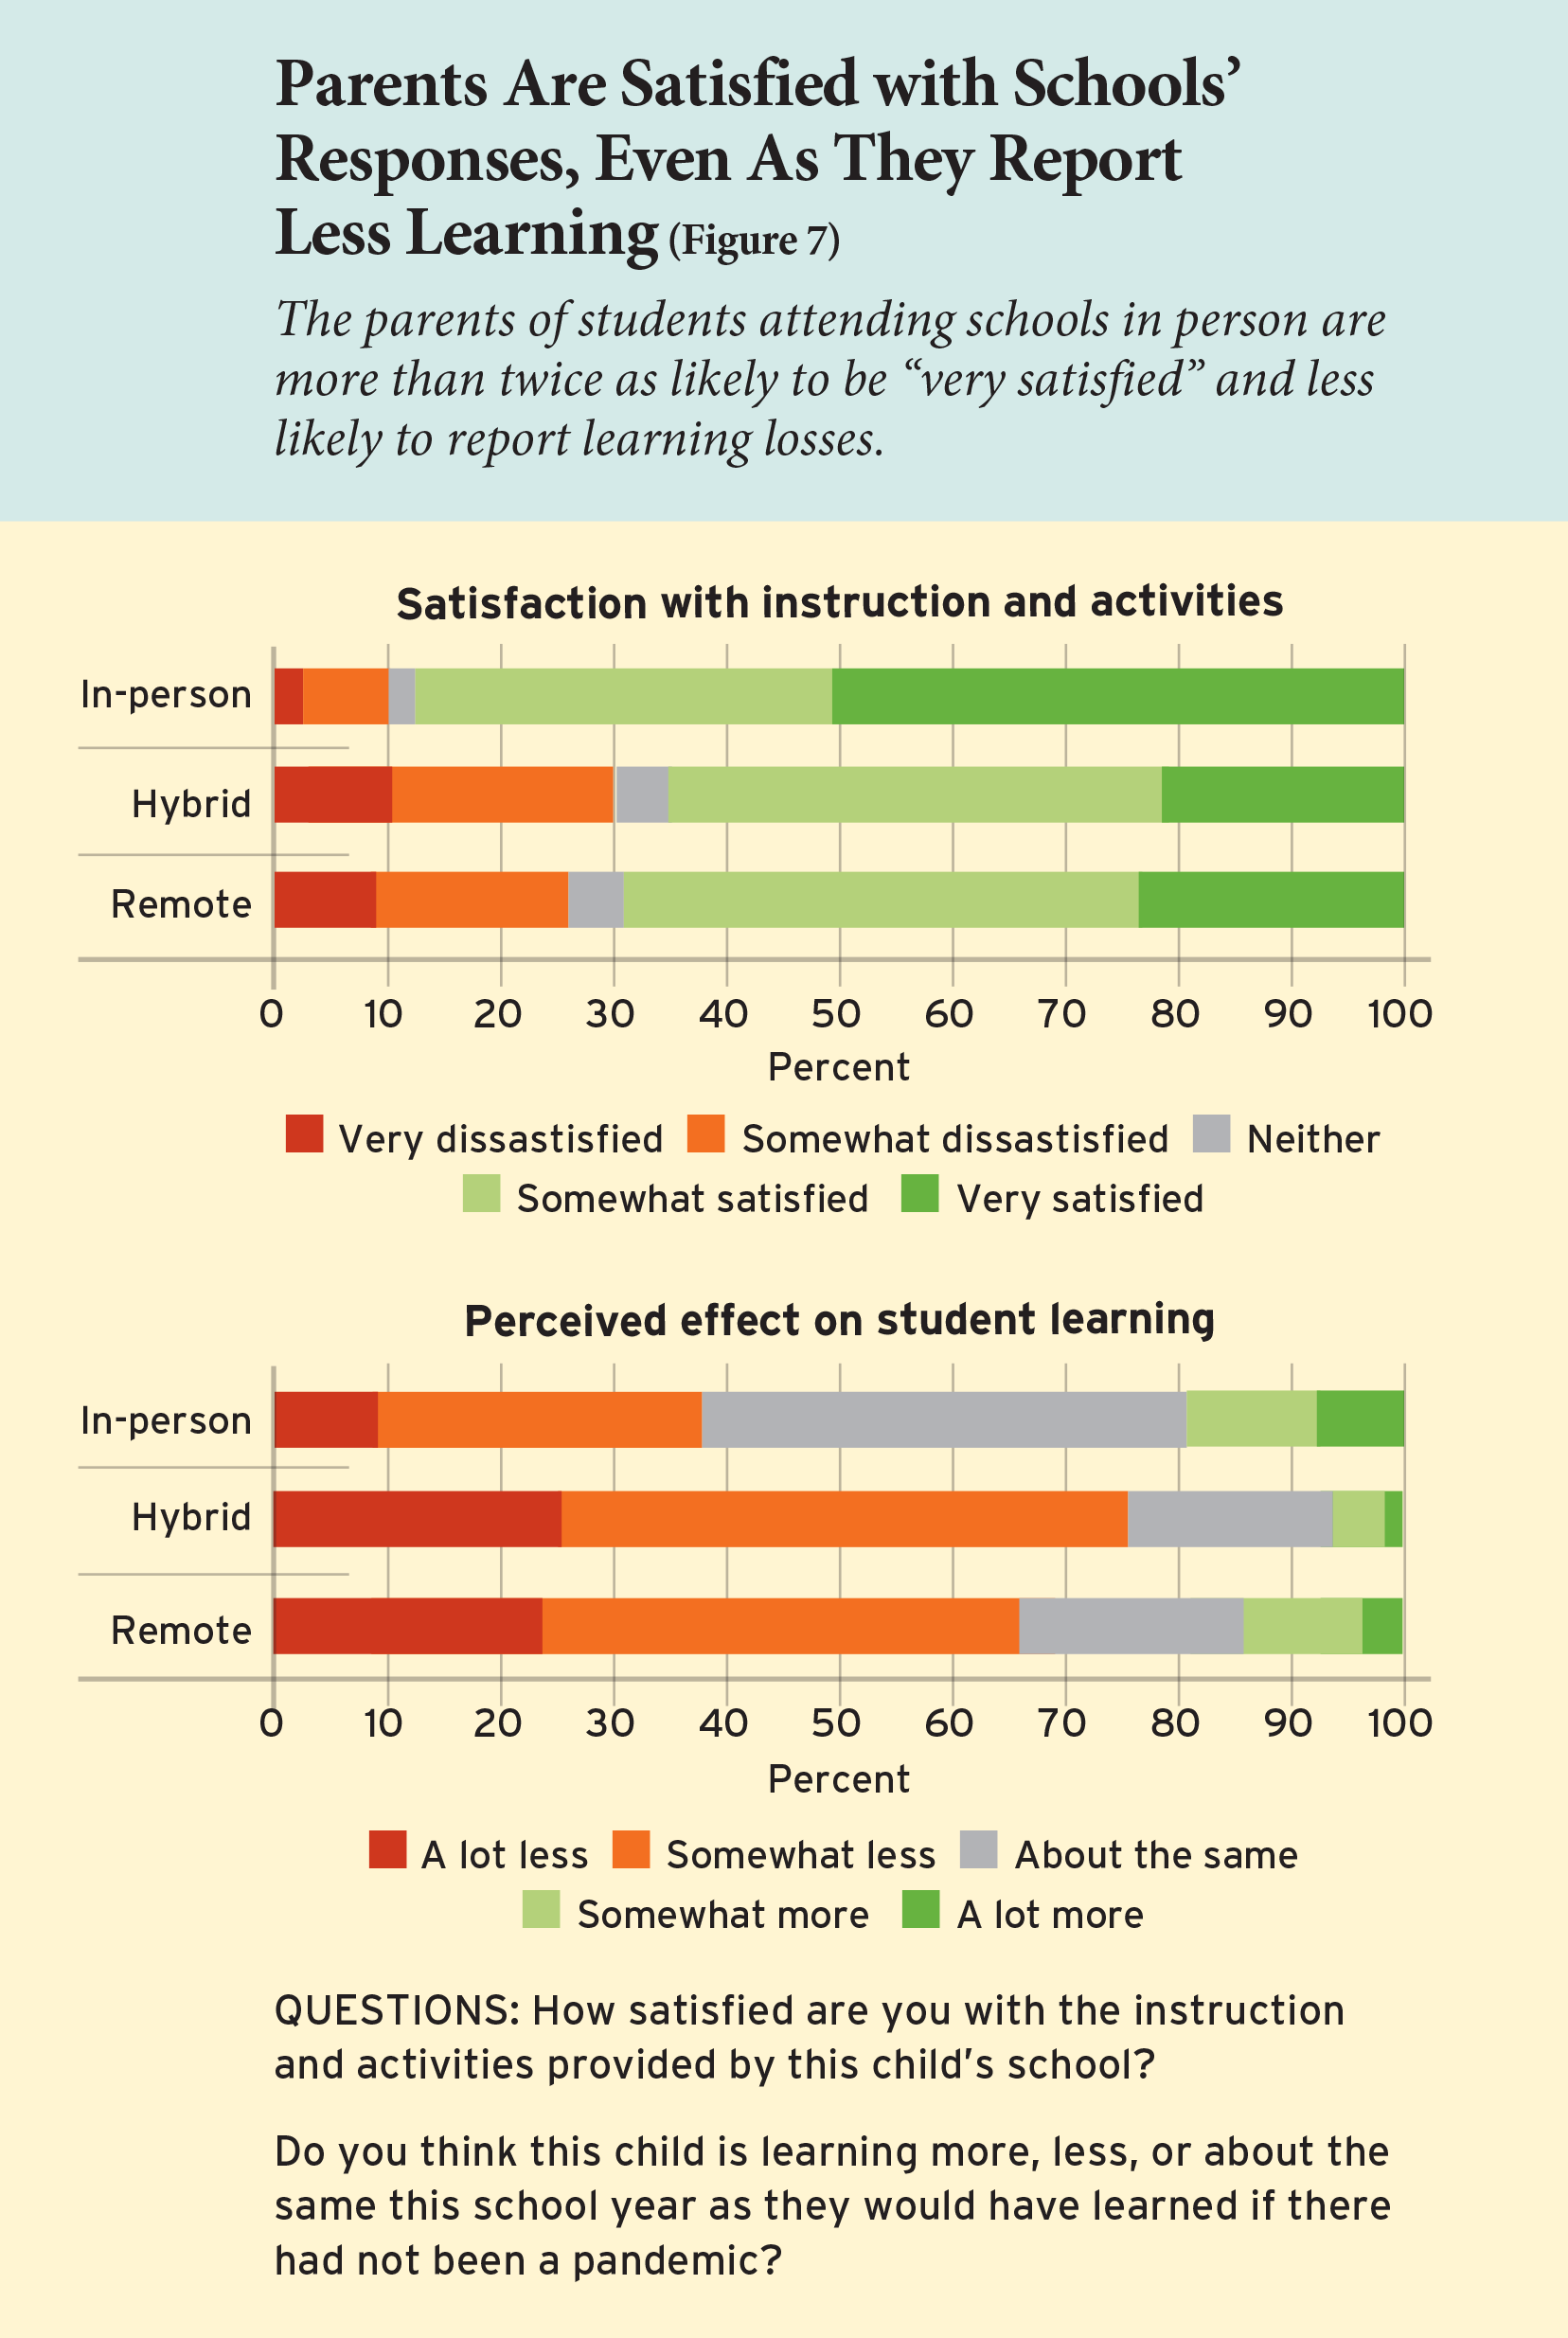 Parents Are Satisfied with Schools’ Responses, Even As They Report Less Learning (Figure 7)